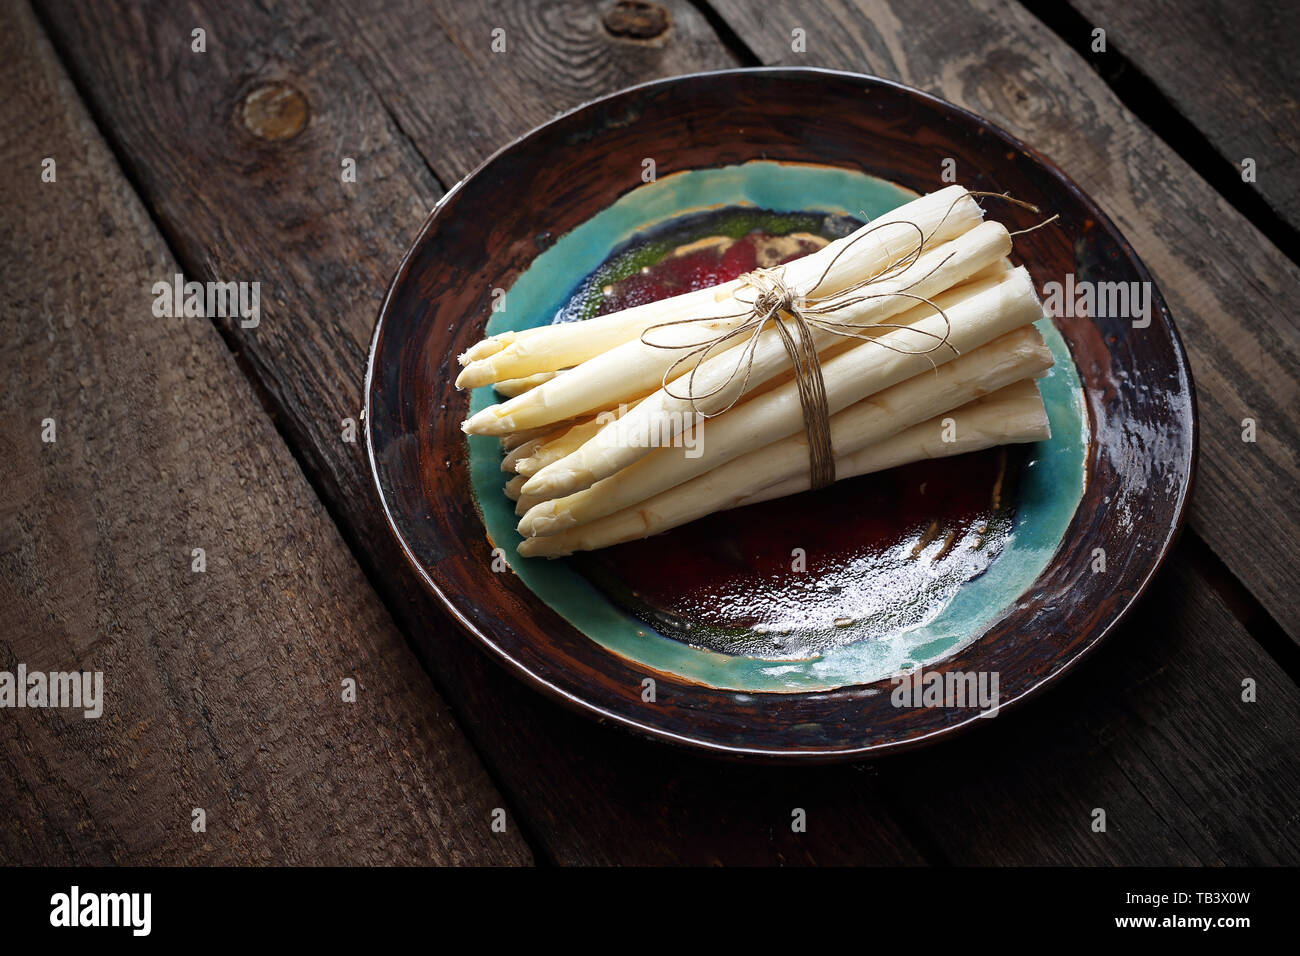 Asparagus. A bunch of white asparagus  vegetables on a ceramic plate. Stock Photo